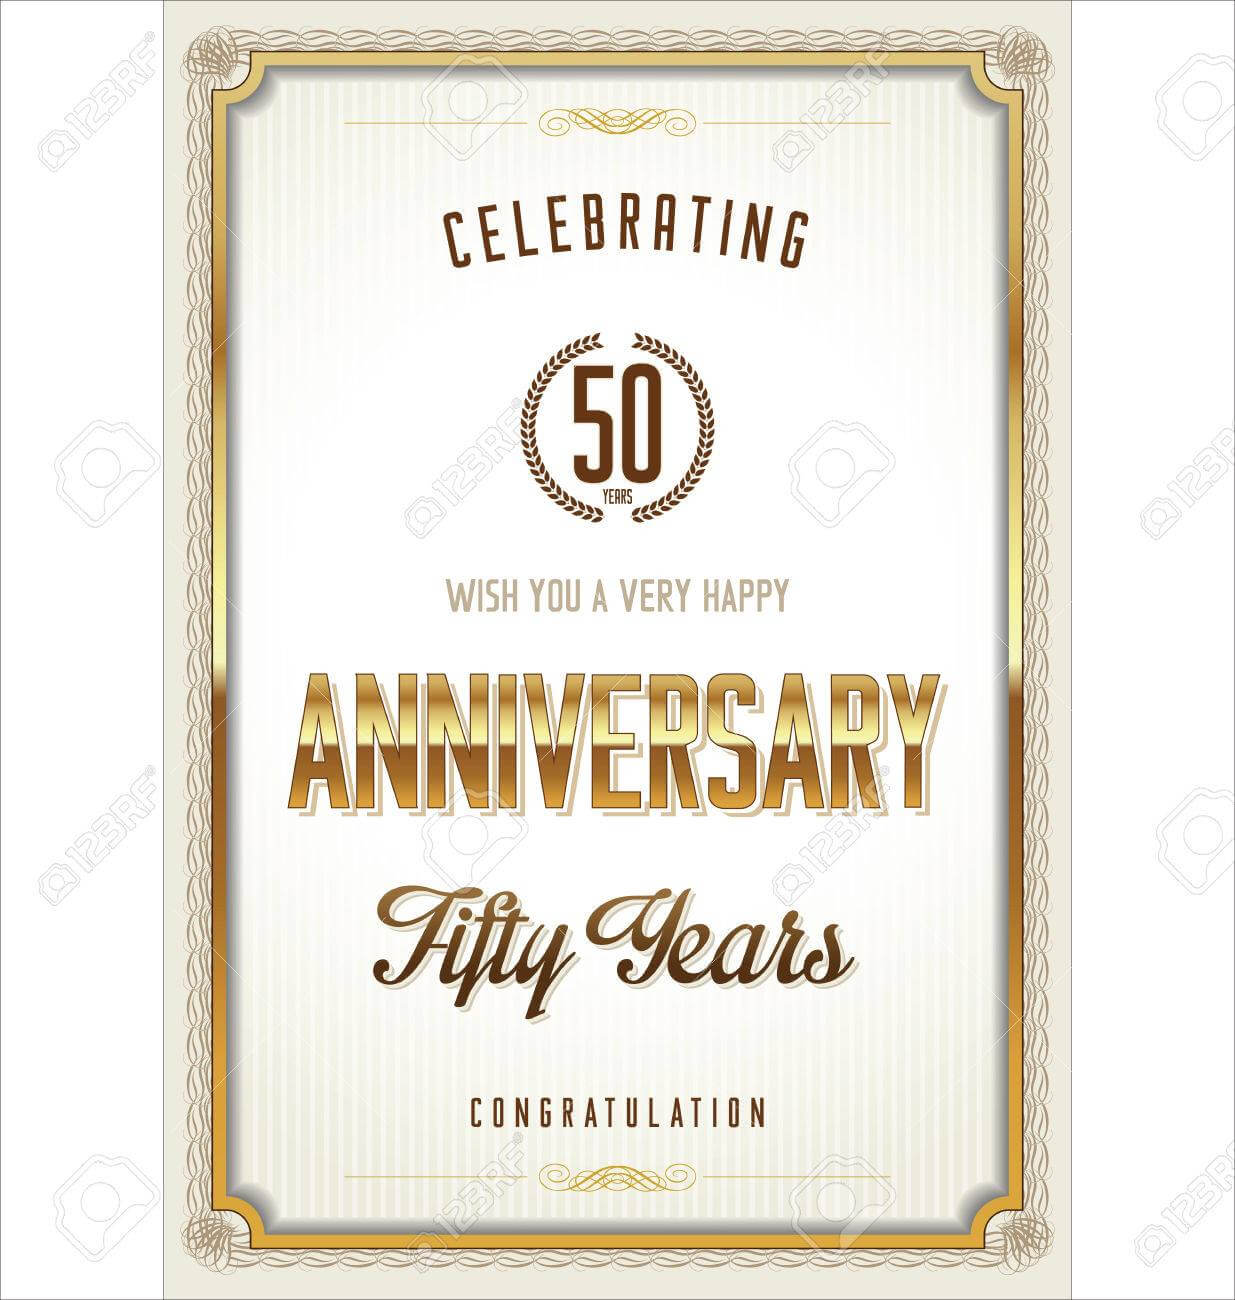 Anniversary Certificate Template For Anniversary Certificate Template Free